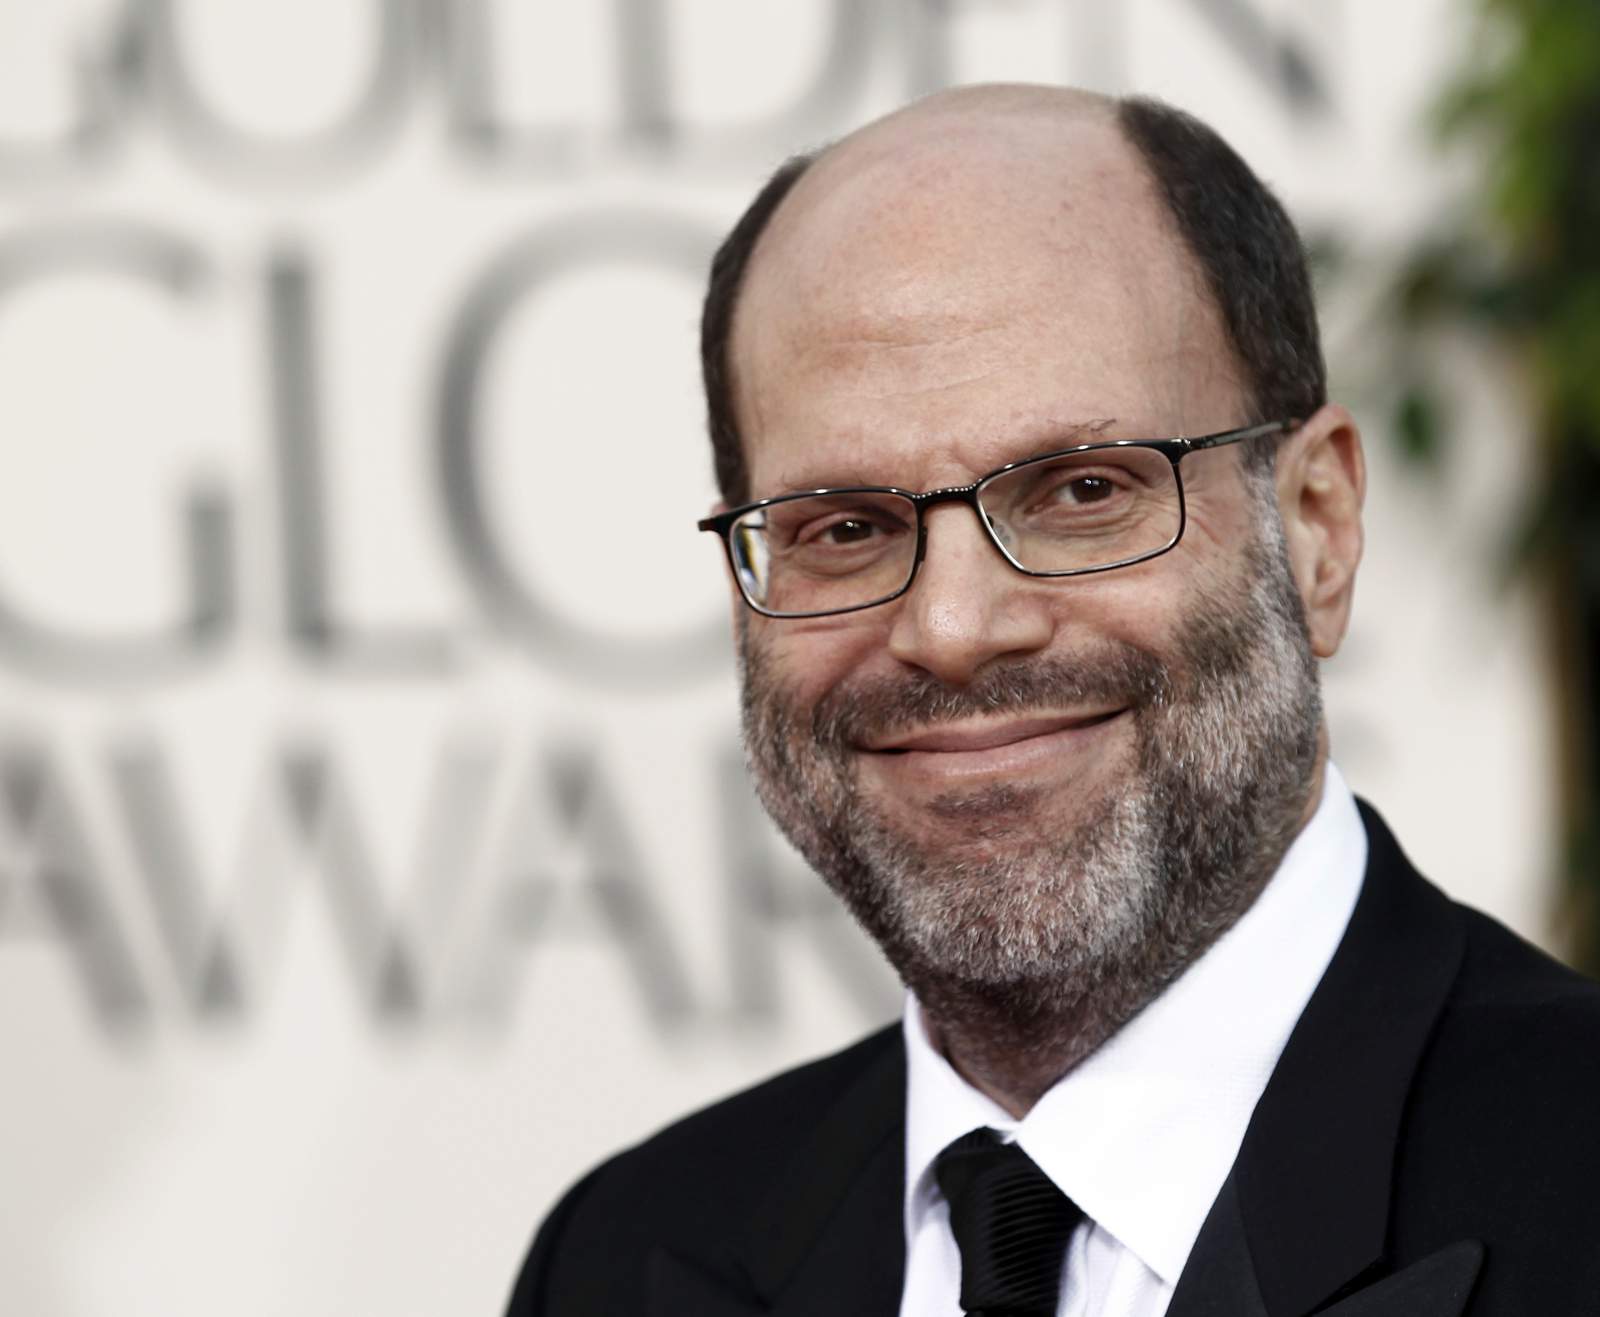 Scott Rudin will 'step back' after allegations of bullying